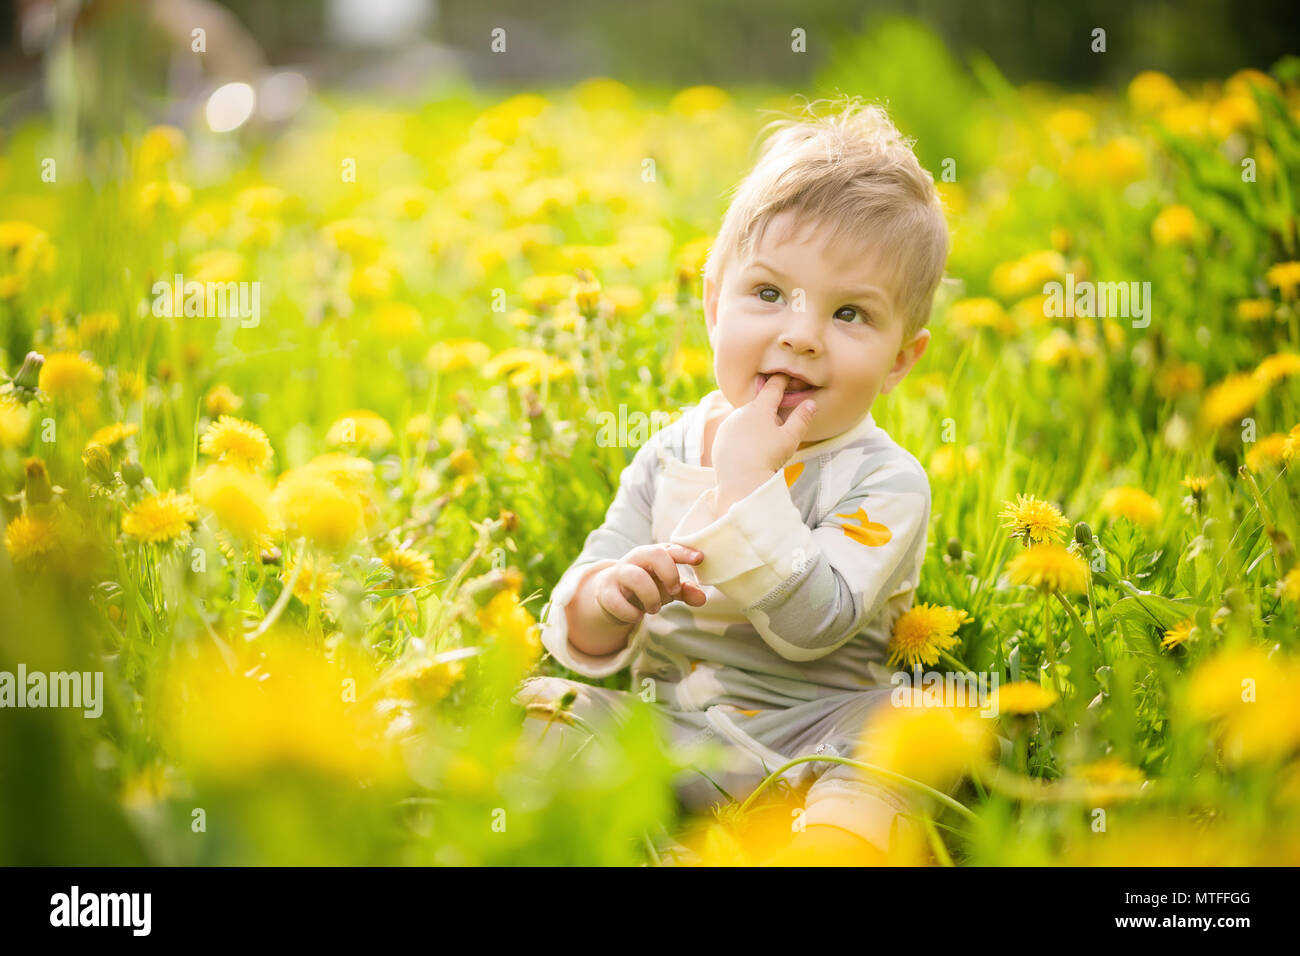 Concept: family values. Portrait of adorable innocent brown-eyed baby play outdoor in the sunny dandelions field and making funny faces. Stock Photo